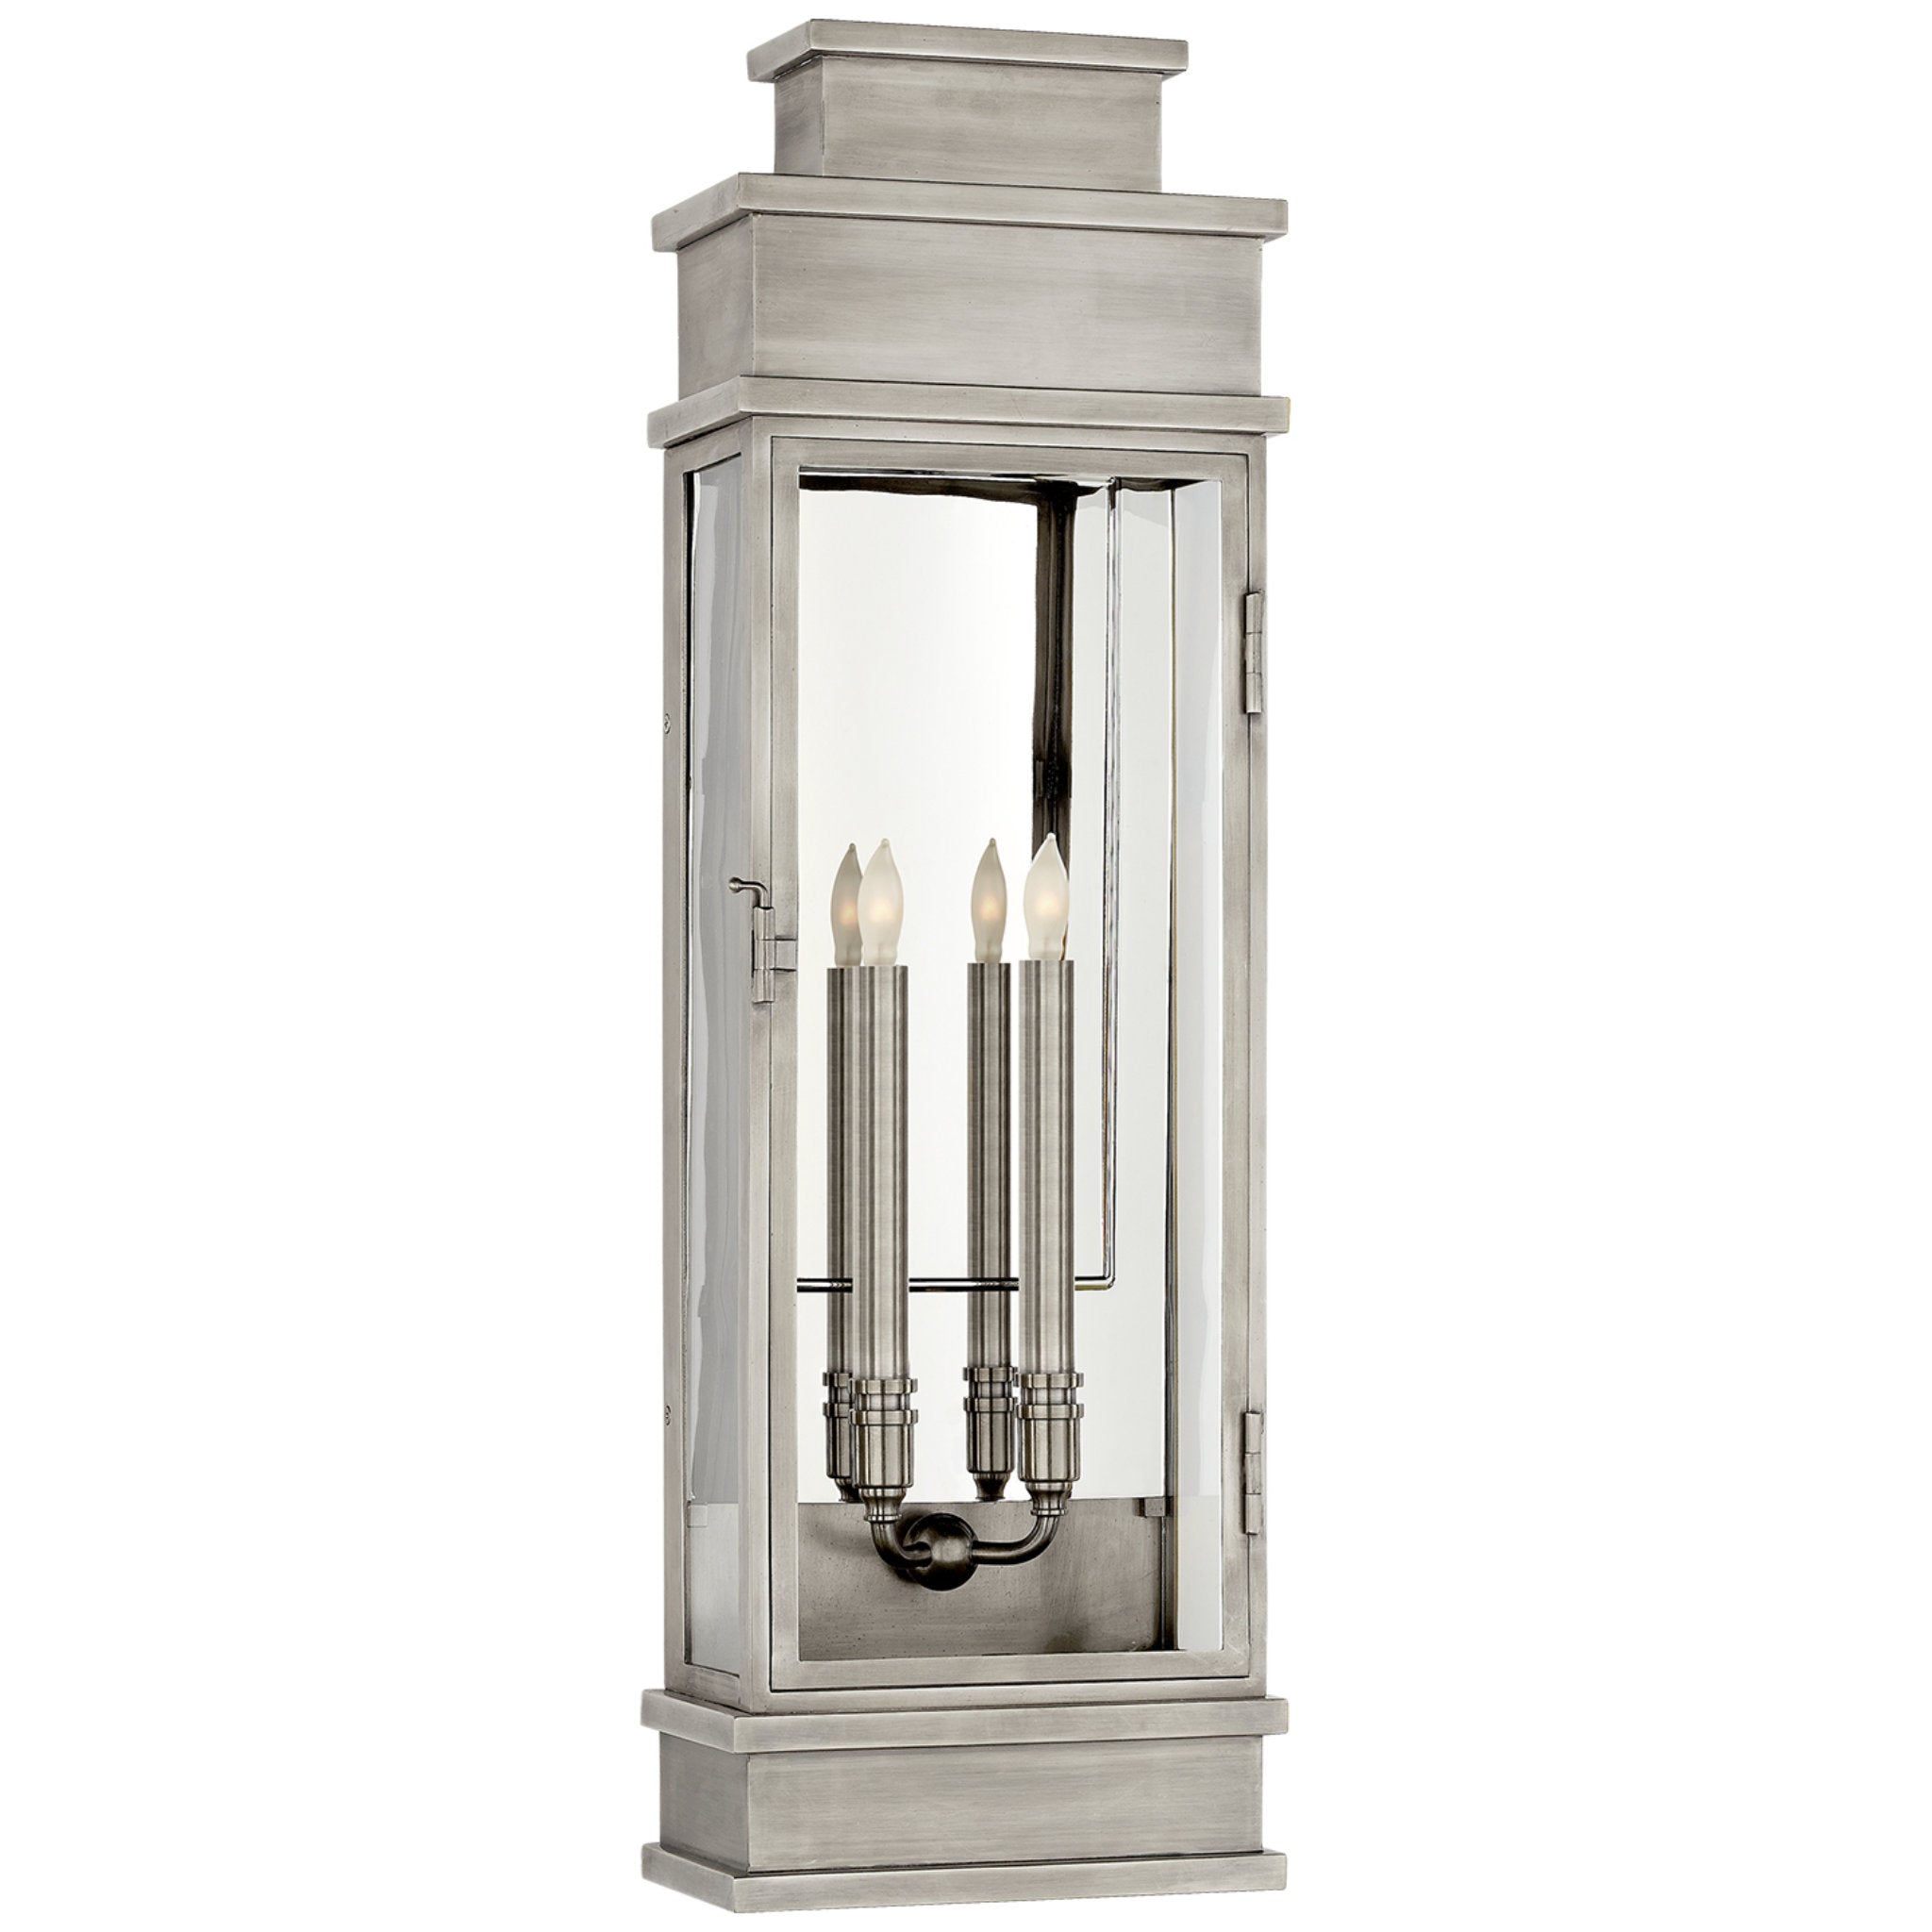 Chapman & Myers Linear Large Wall Lantern in Antique Nickel with Clear Glass